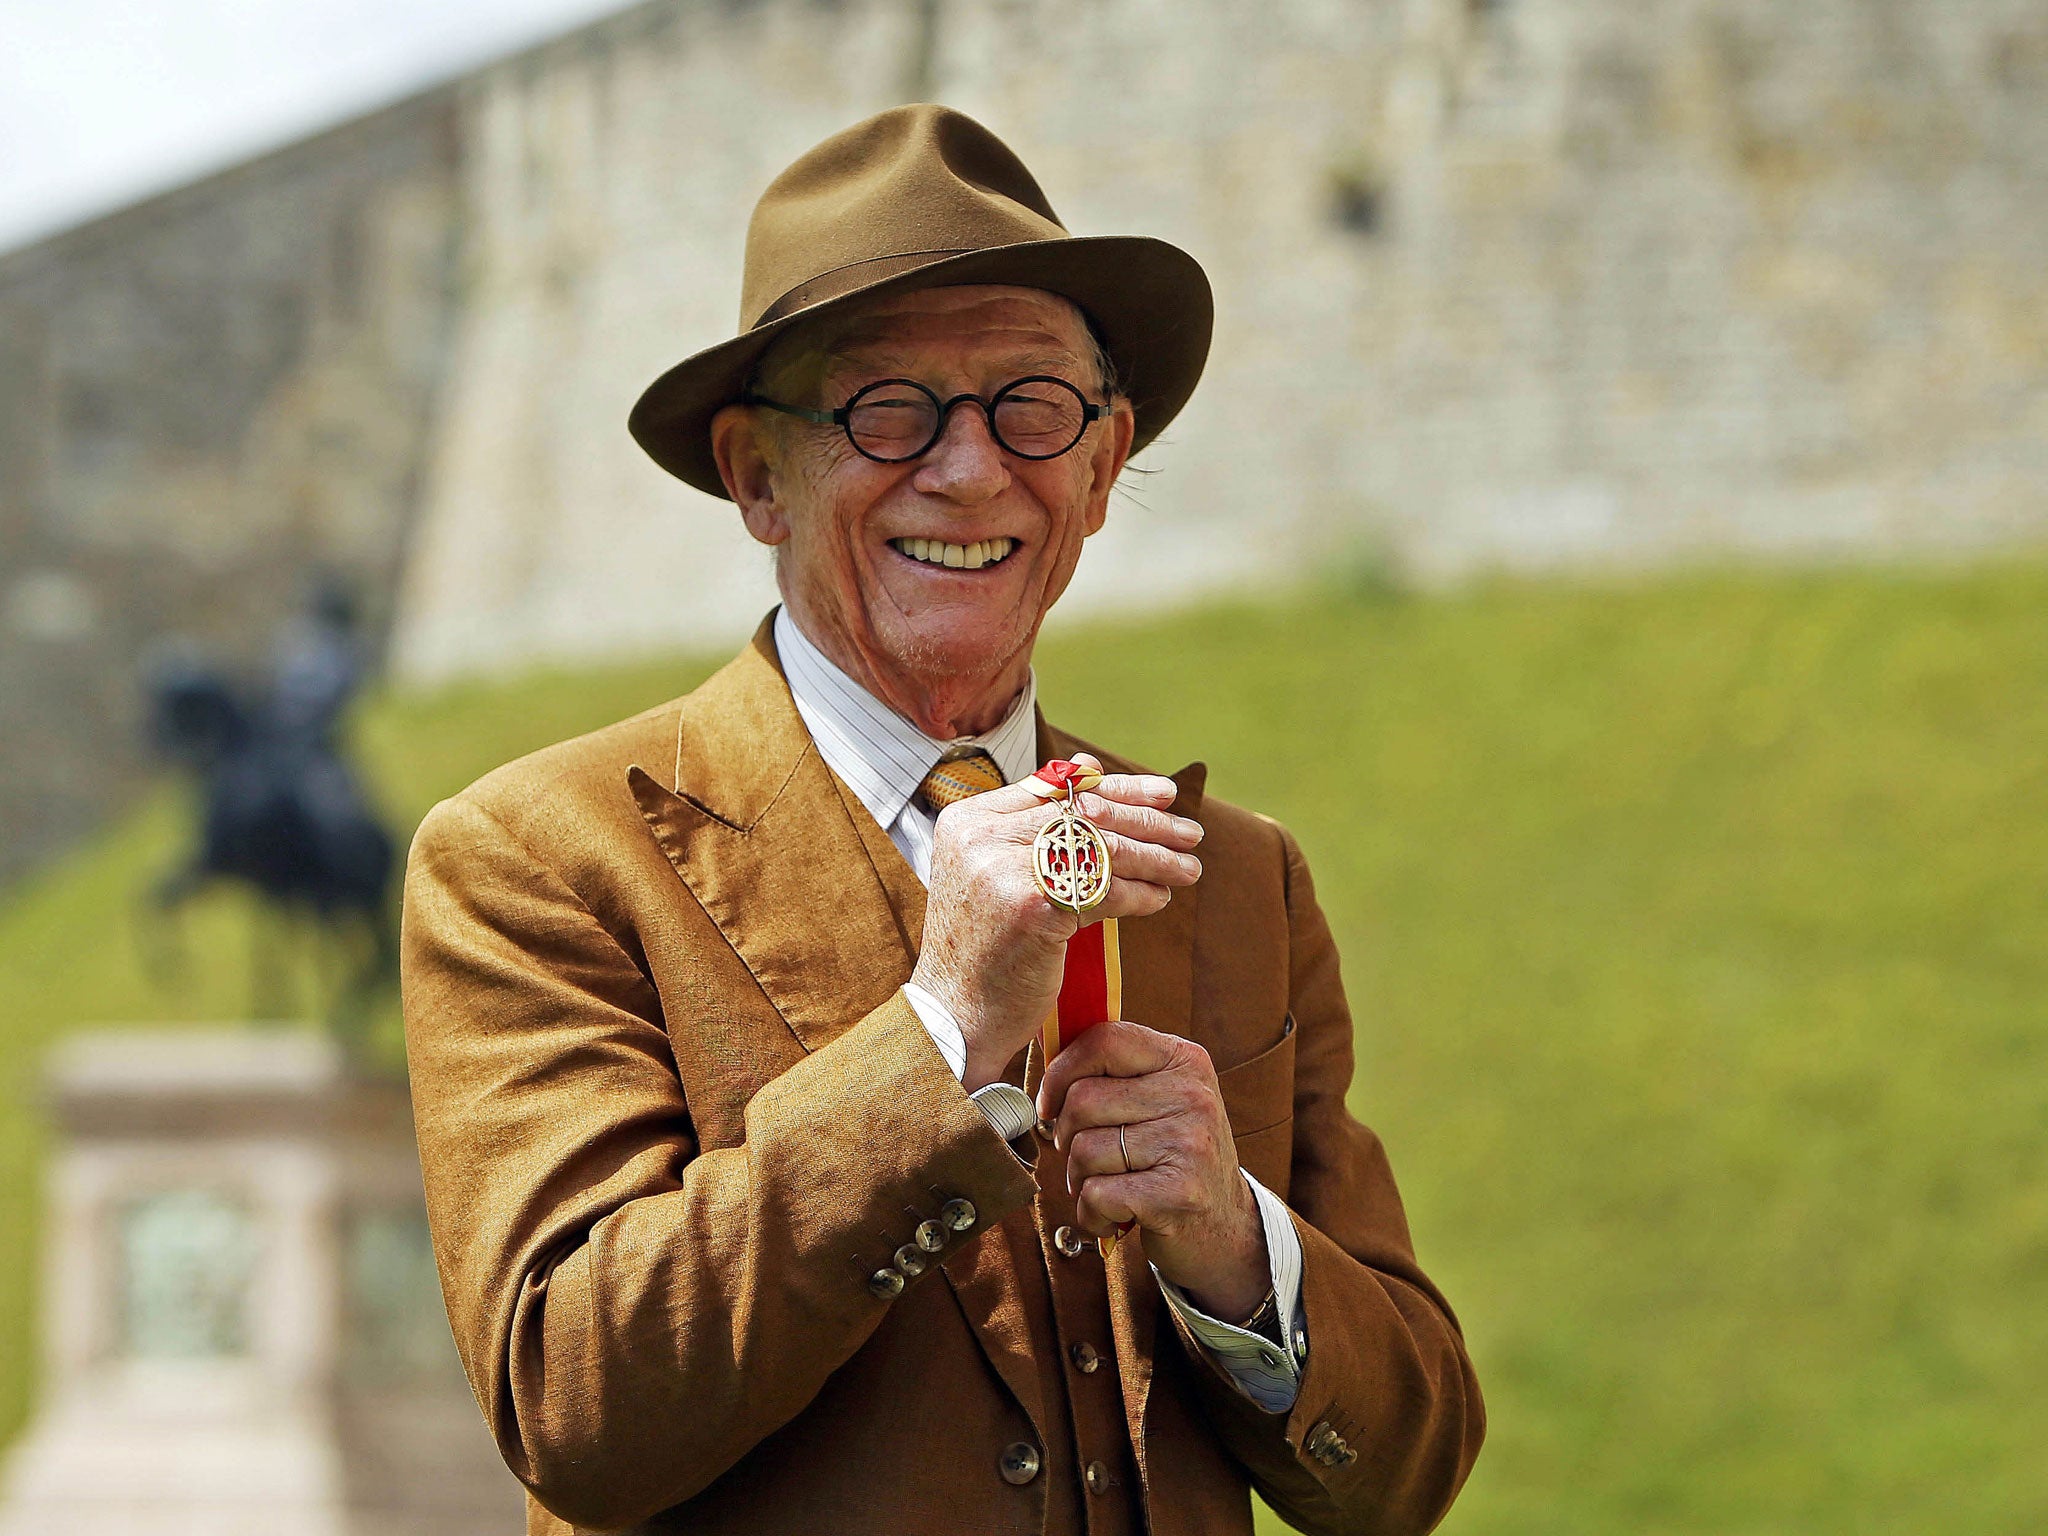 Sir John Hurt after being knighted by the Queen